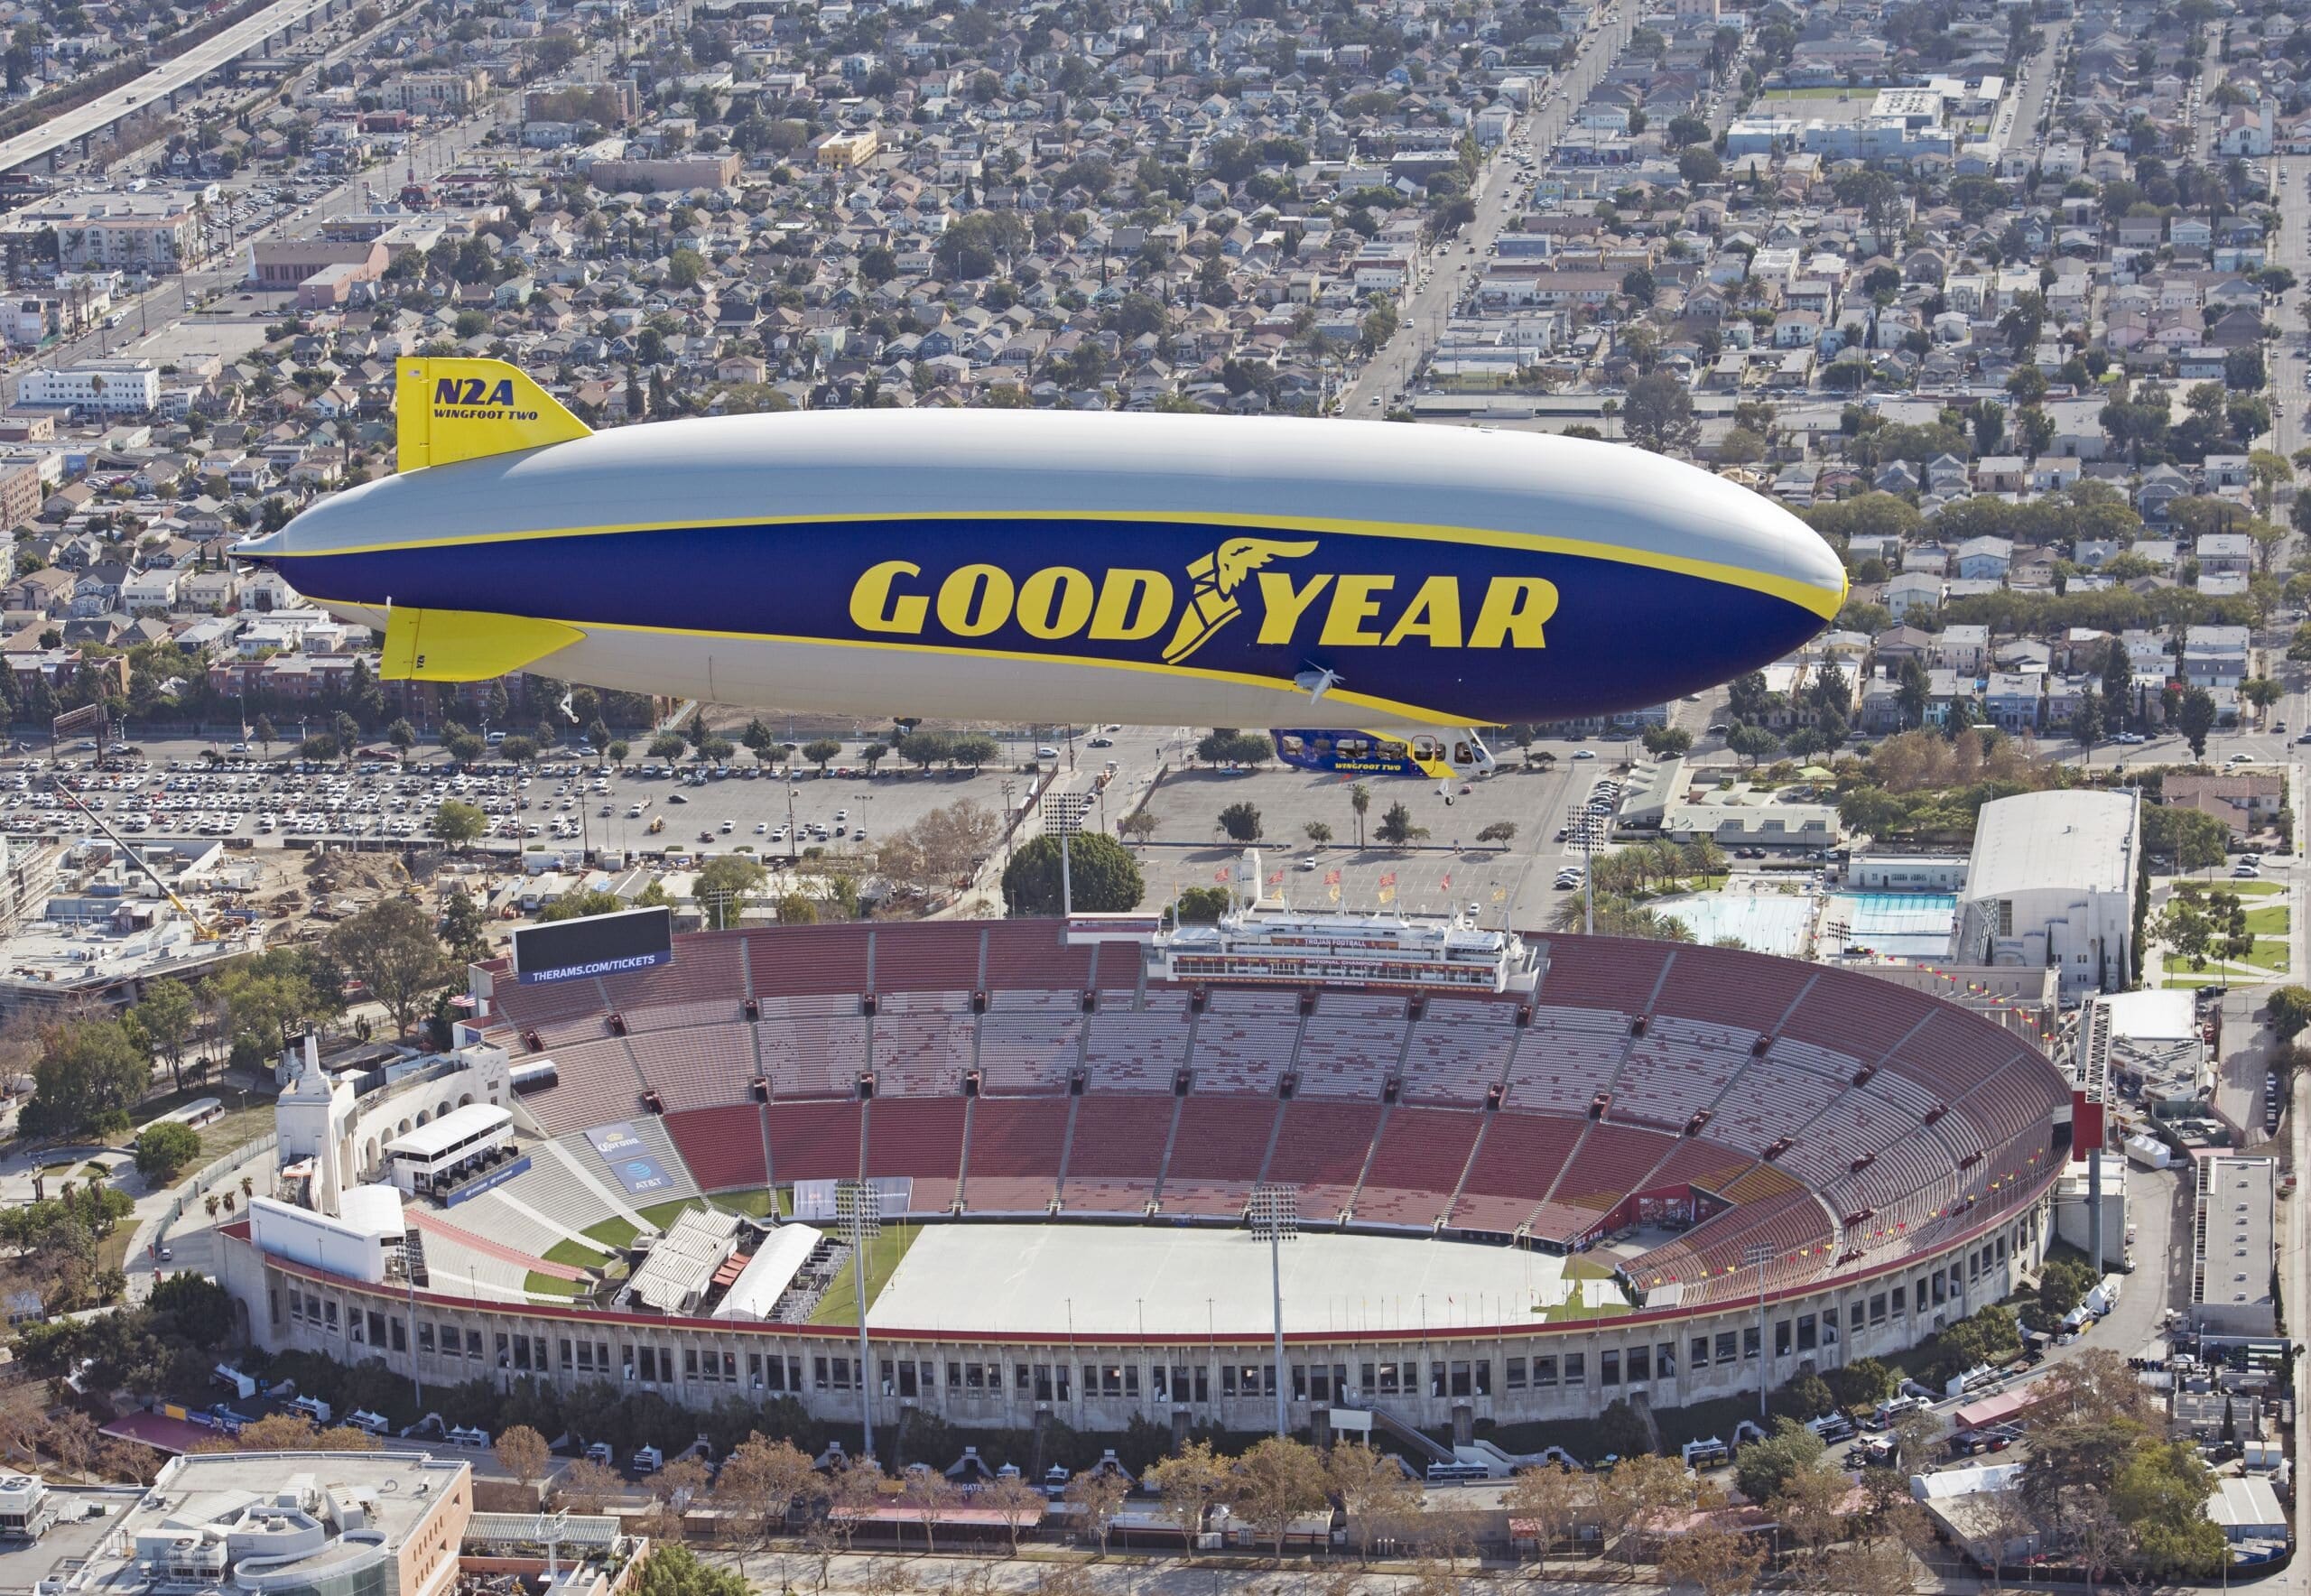 Goodyear Blimp or UFO? The NJ residents who were confused – Film Daily